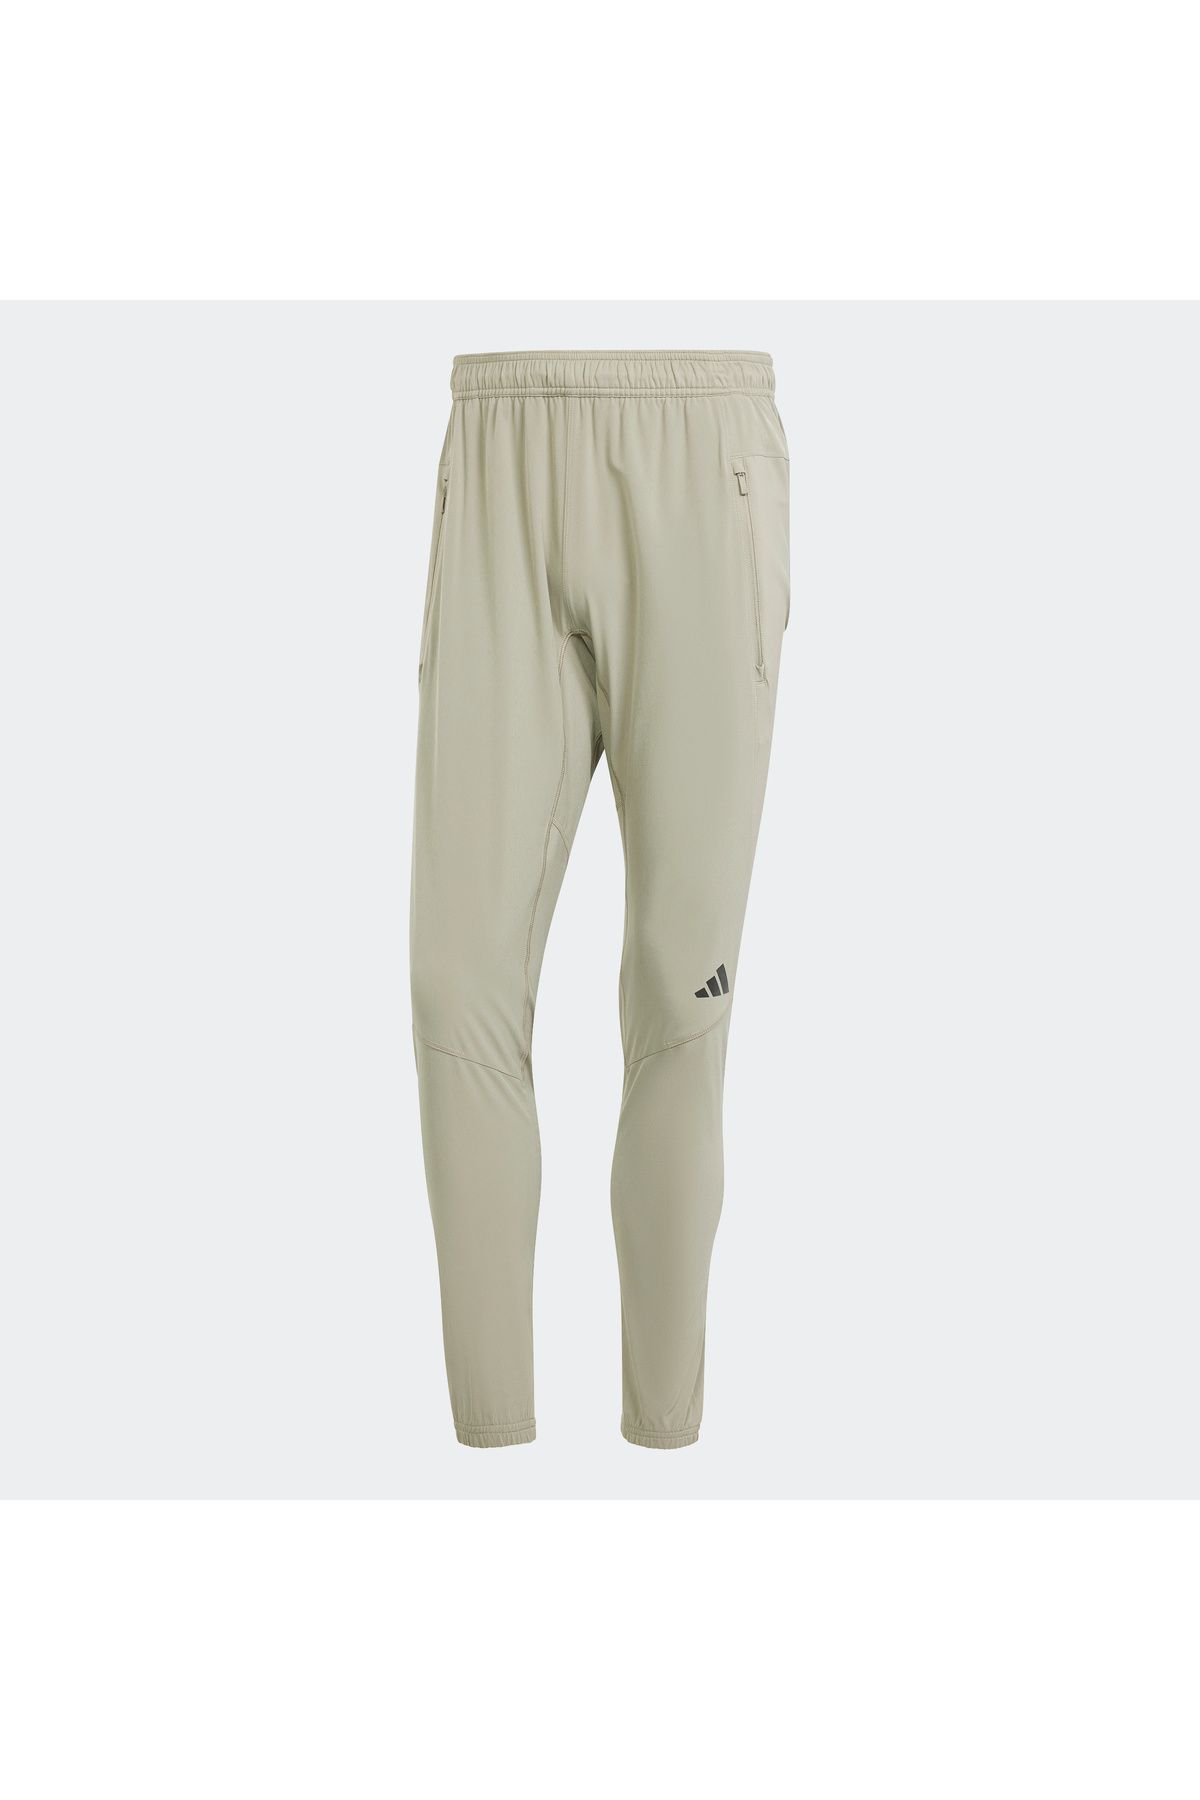 adidas ADİDAS IS3794 ADİDAS IS3794 D4T PANT